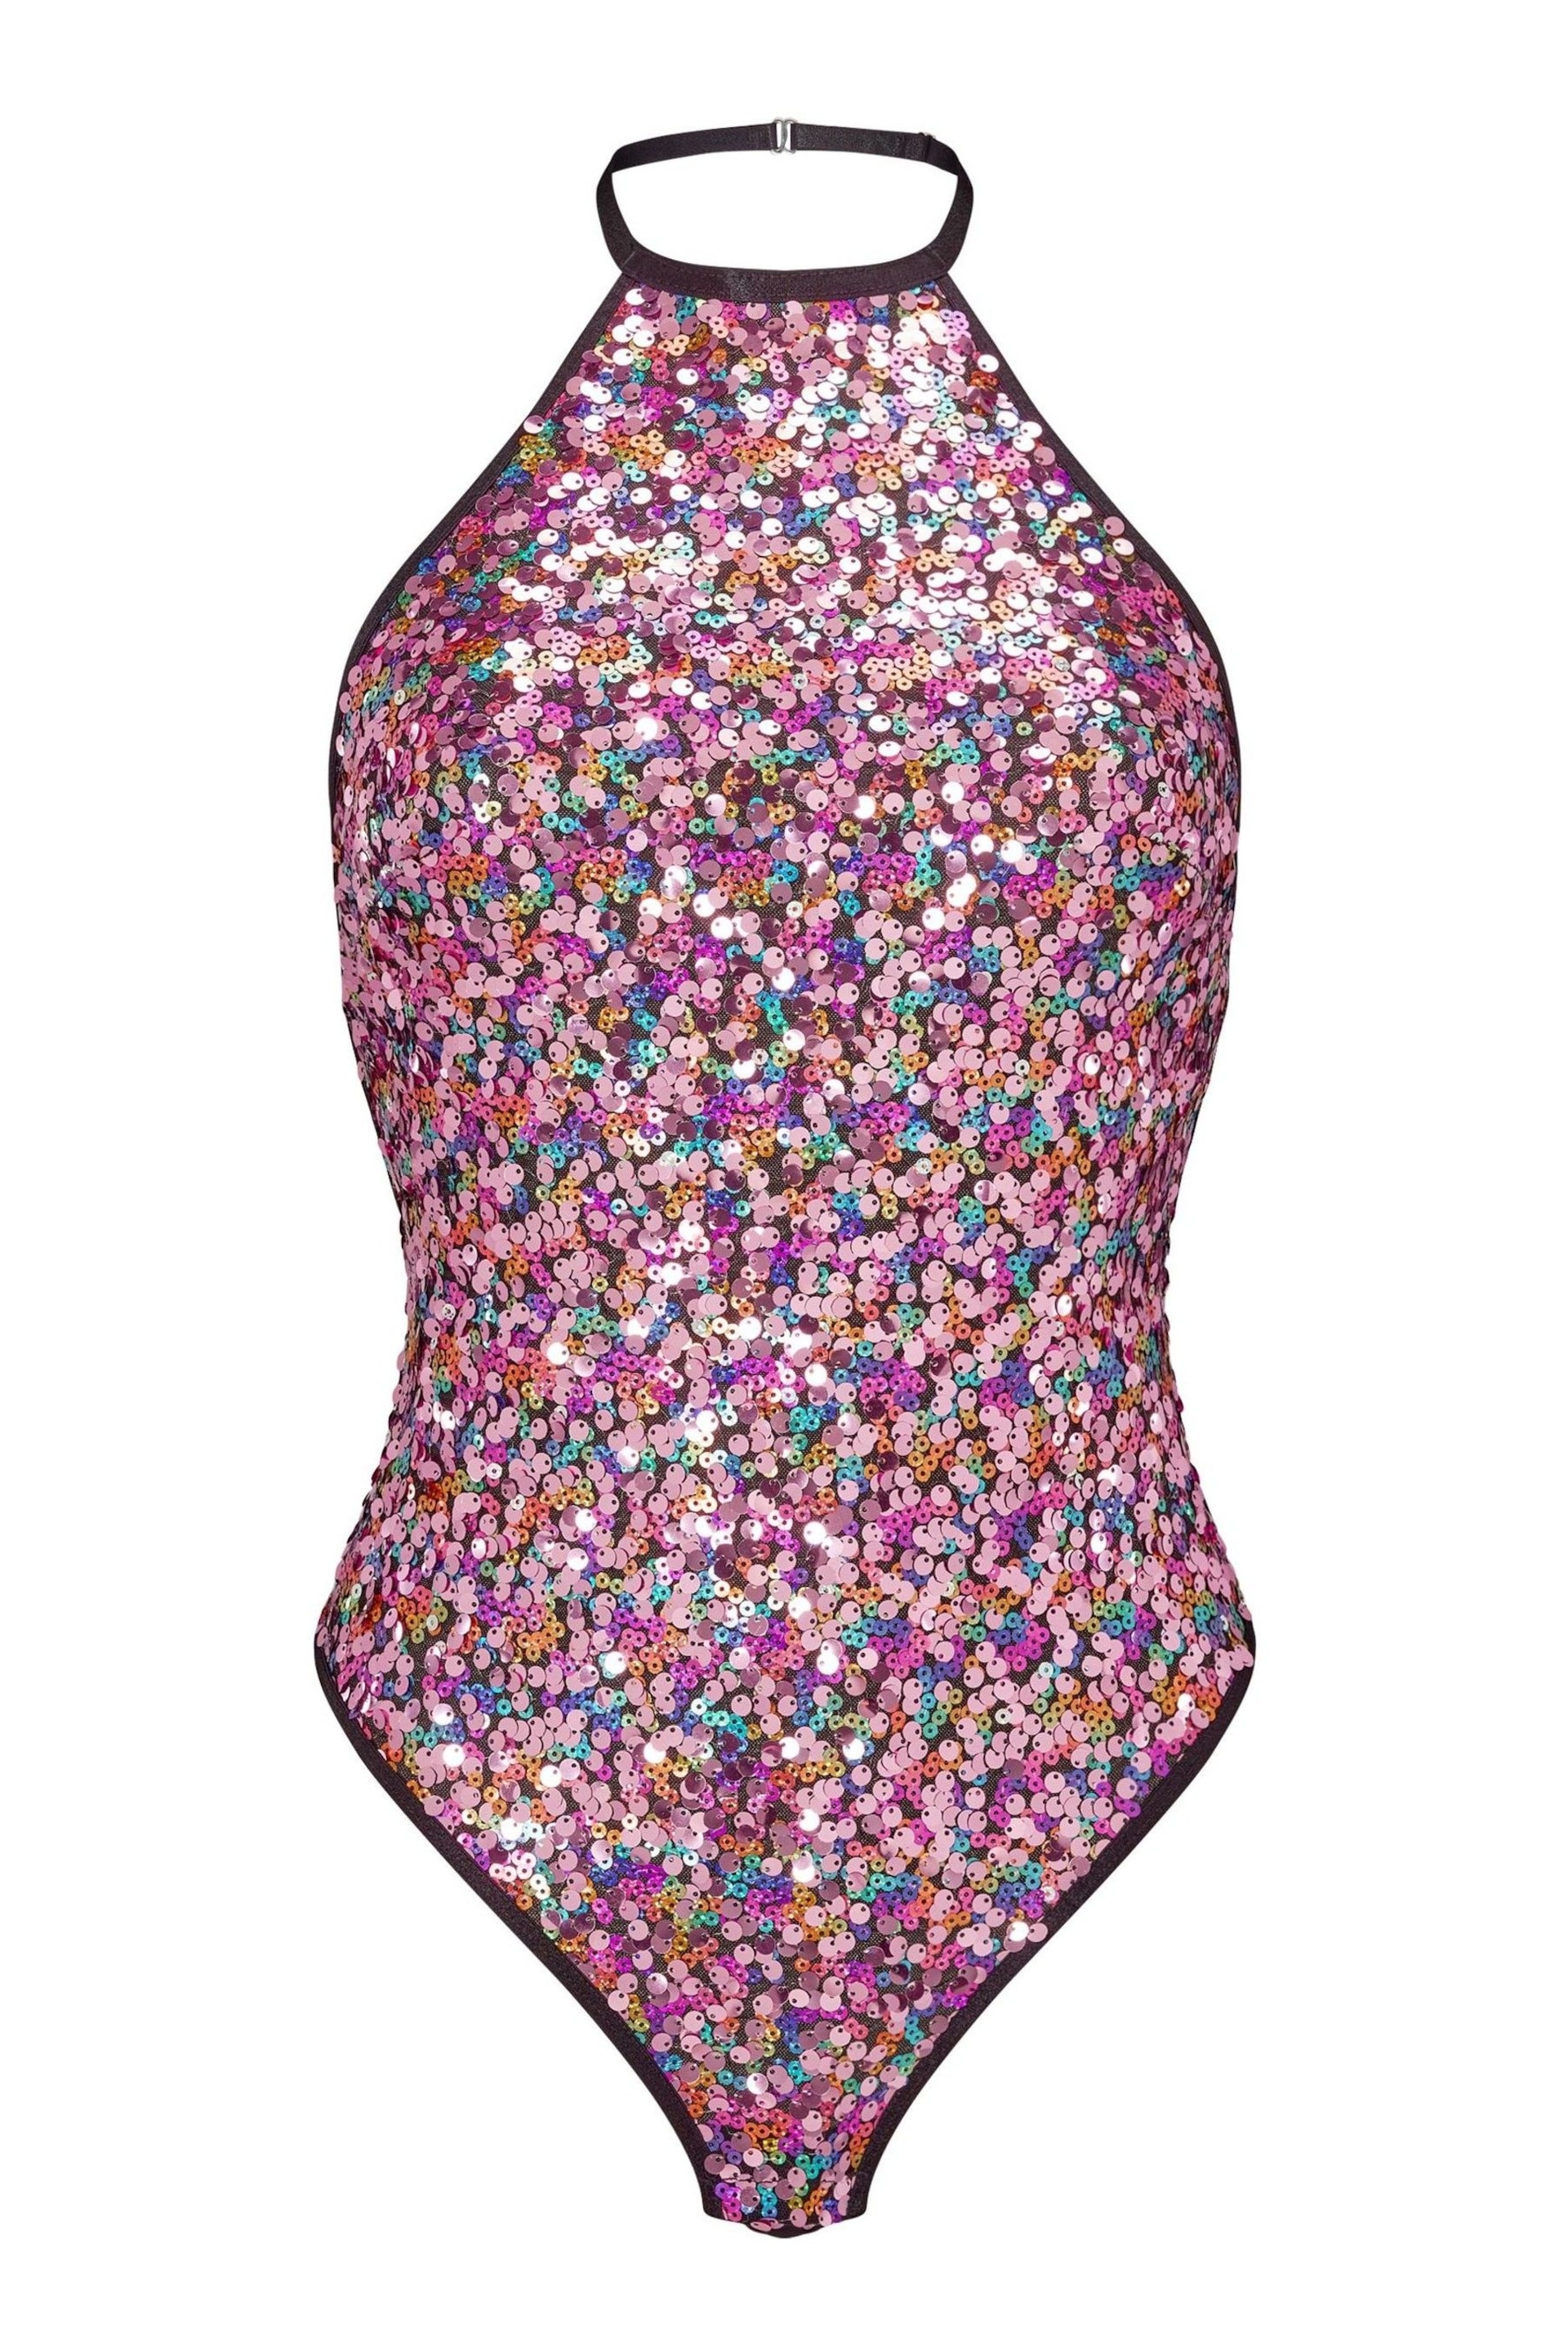 Ann Summers Pink Main Stage Sequin Bodysuit - Image 4 of 4